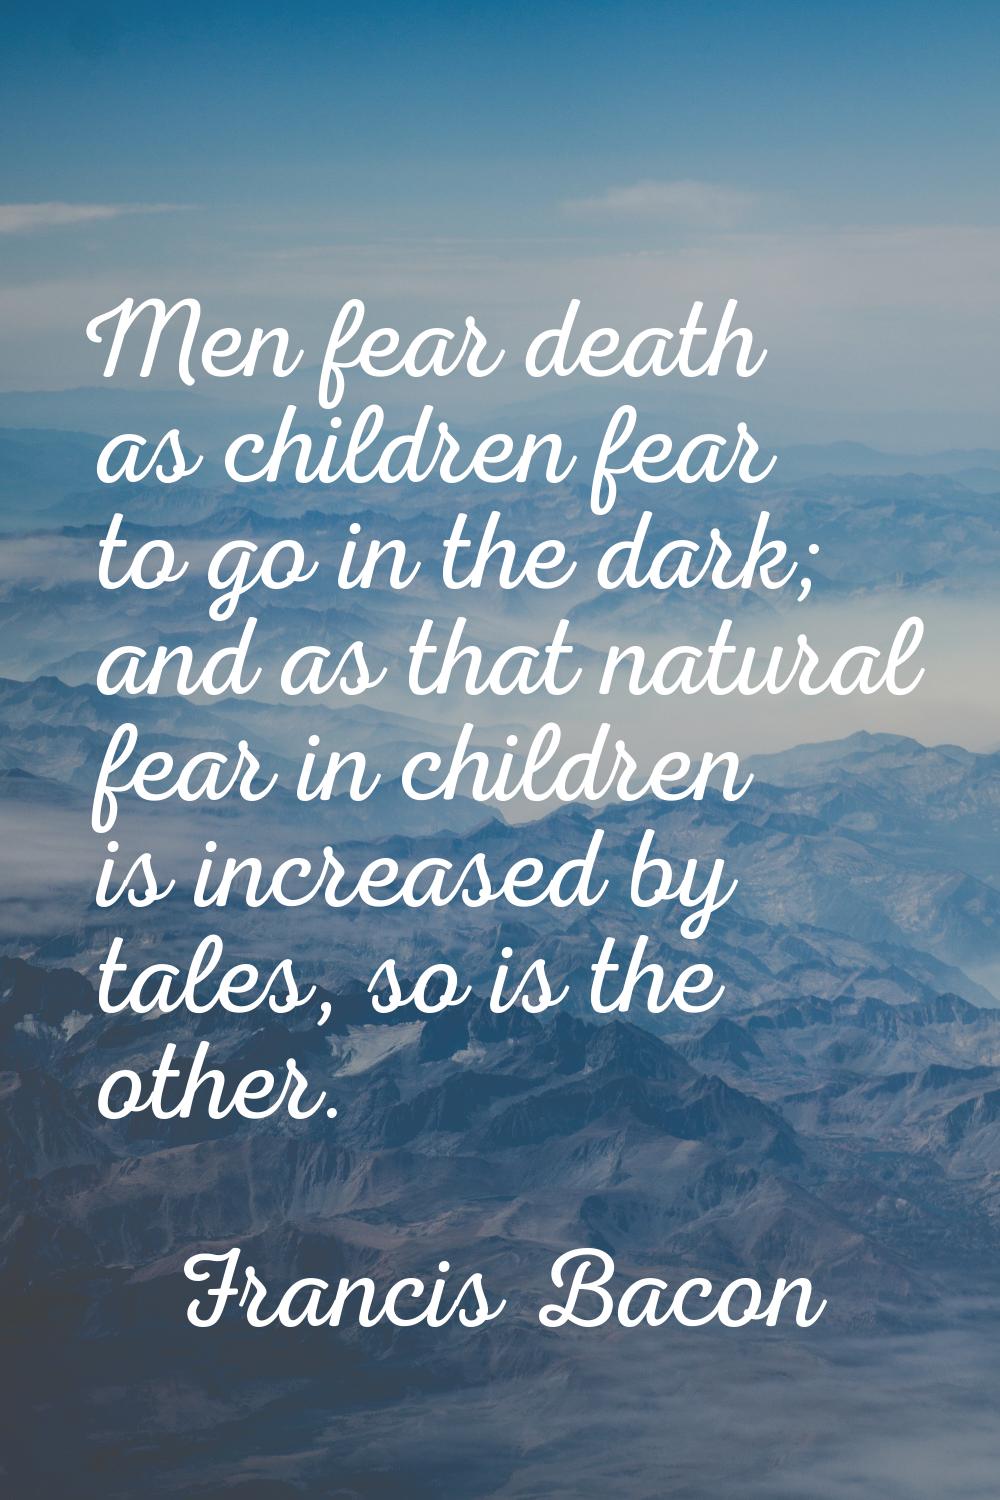 Men fear death as children fear to go in the dark; and as that natural fear in children is increase